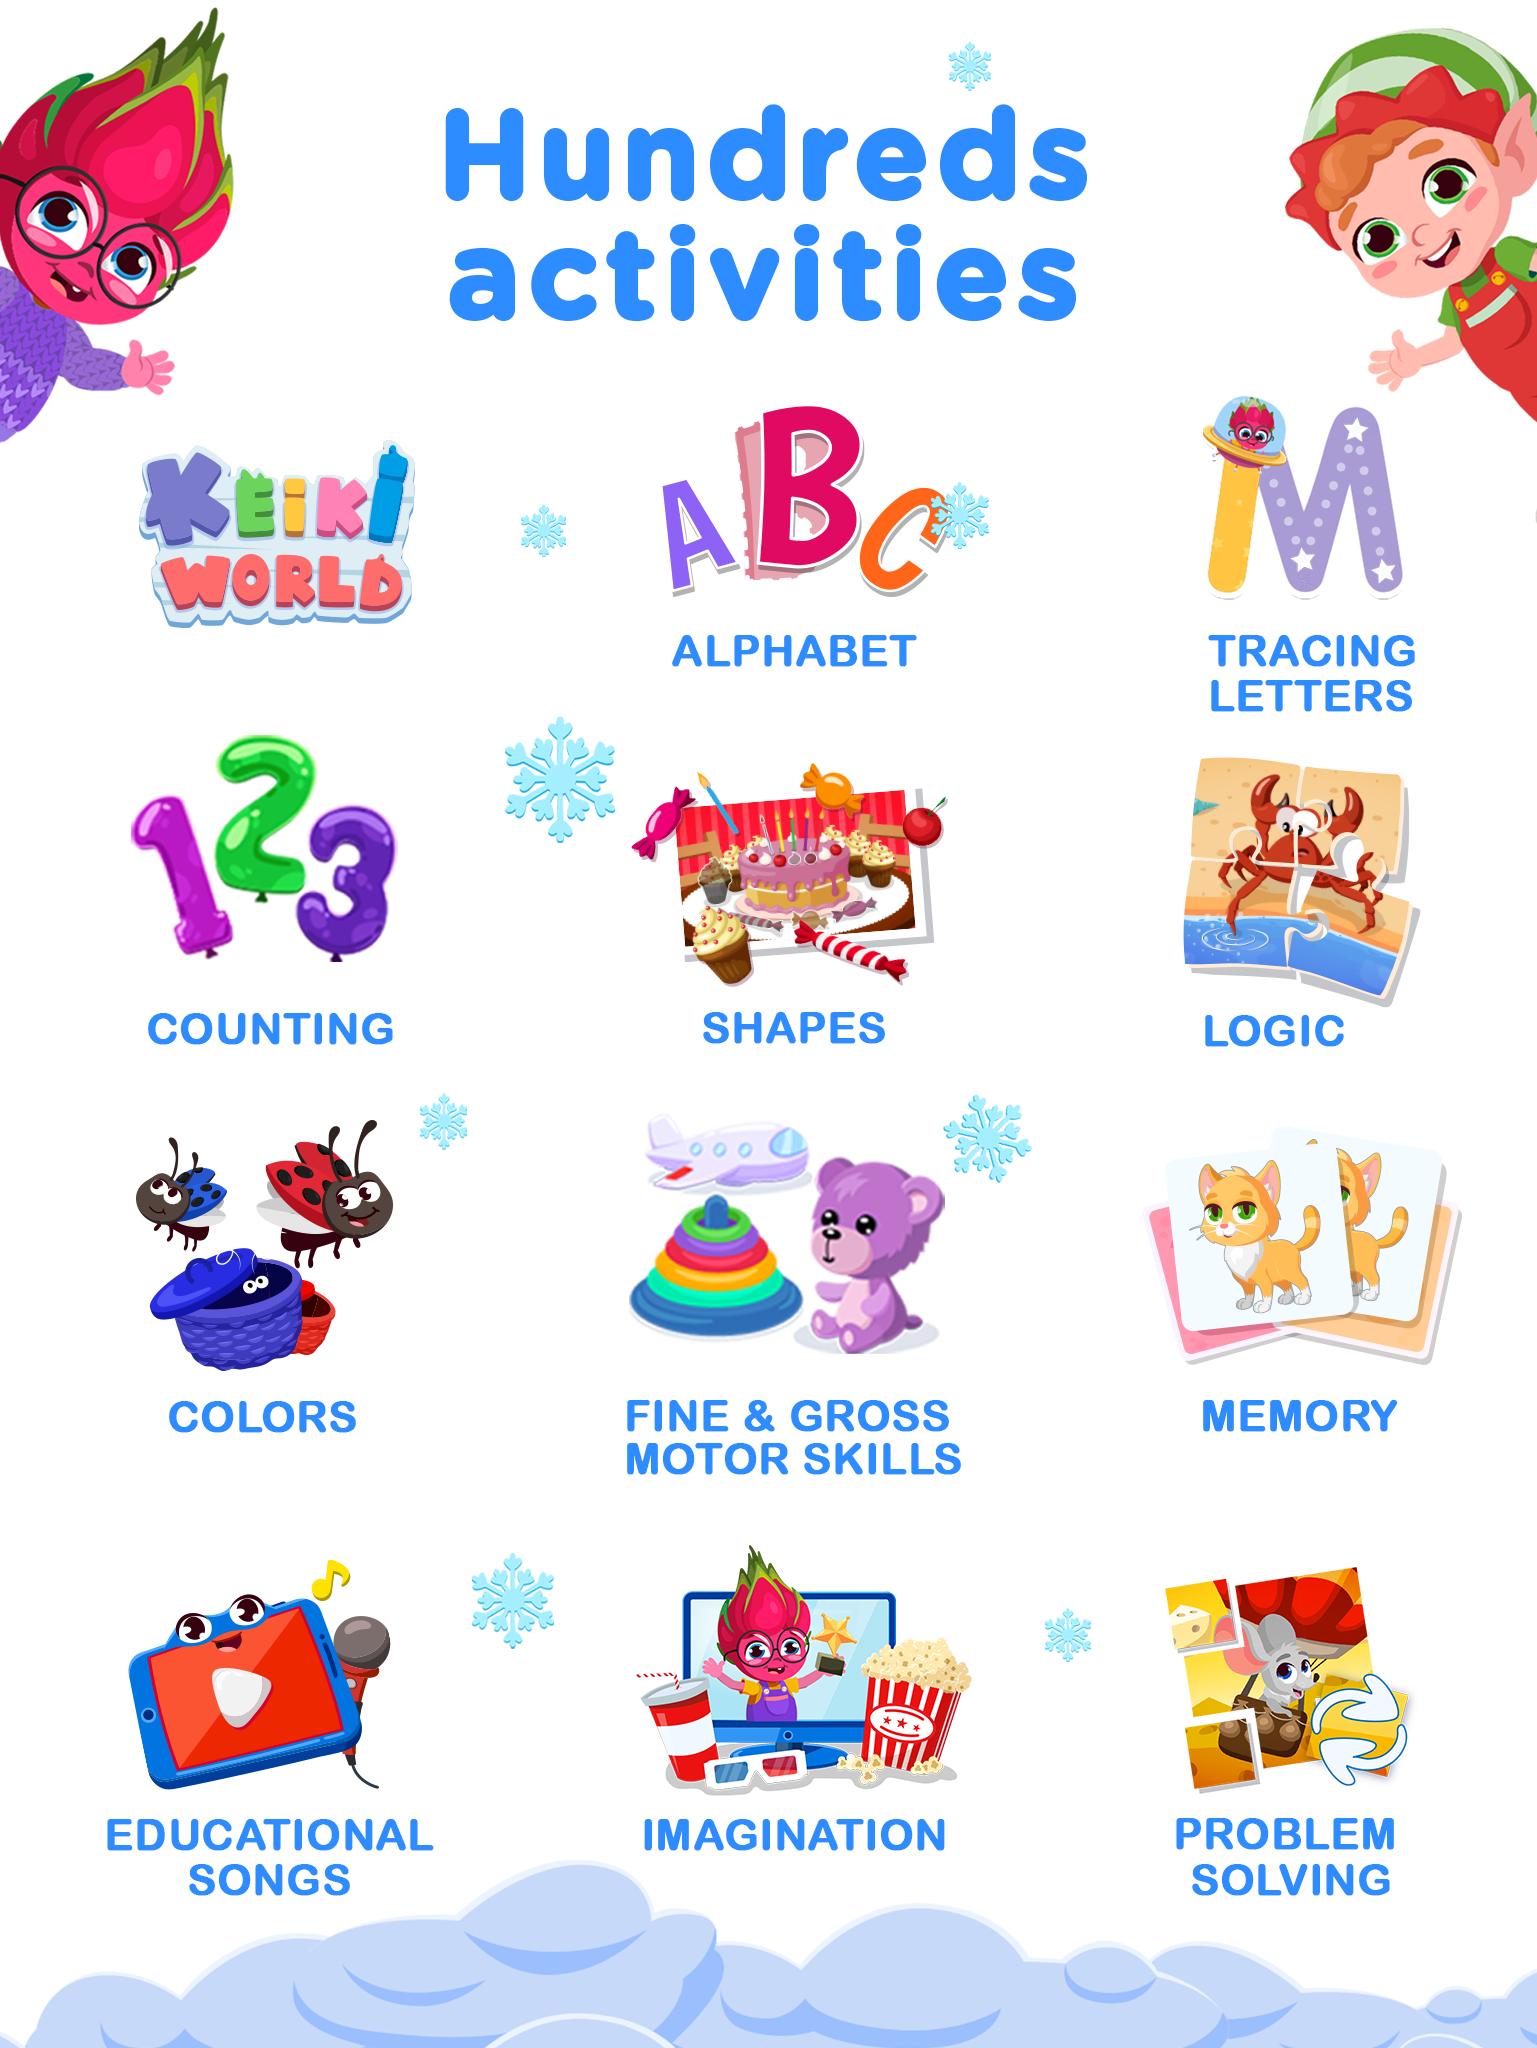 Keiki - ABC Letters Puzzle Games for Kids & Babies 1.9.1 Screenshot 15